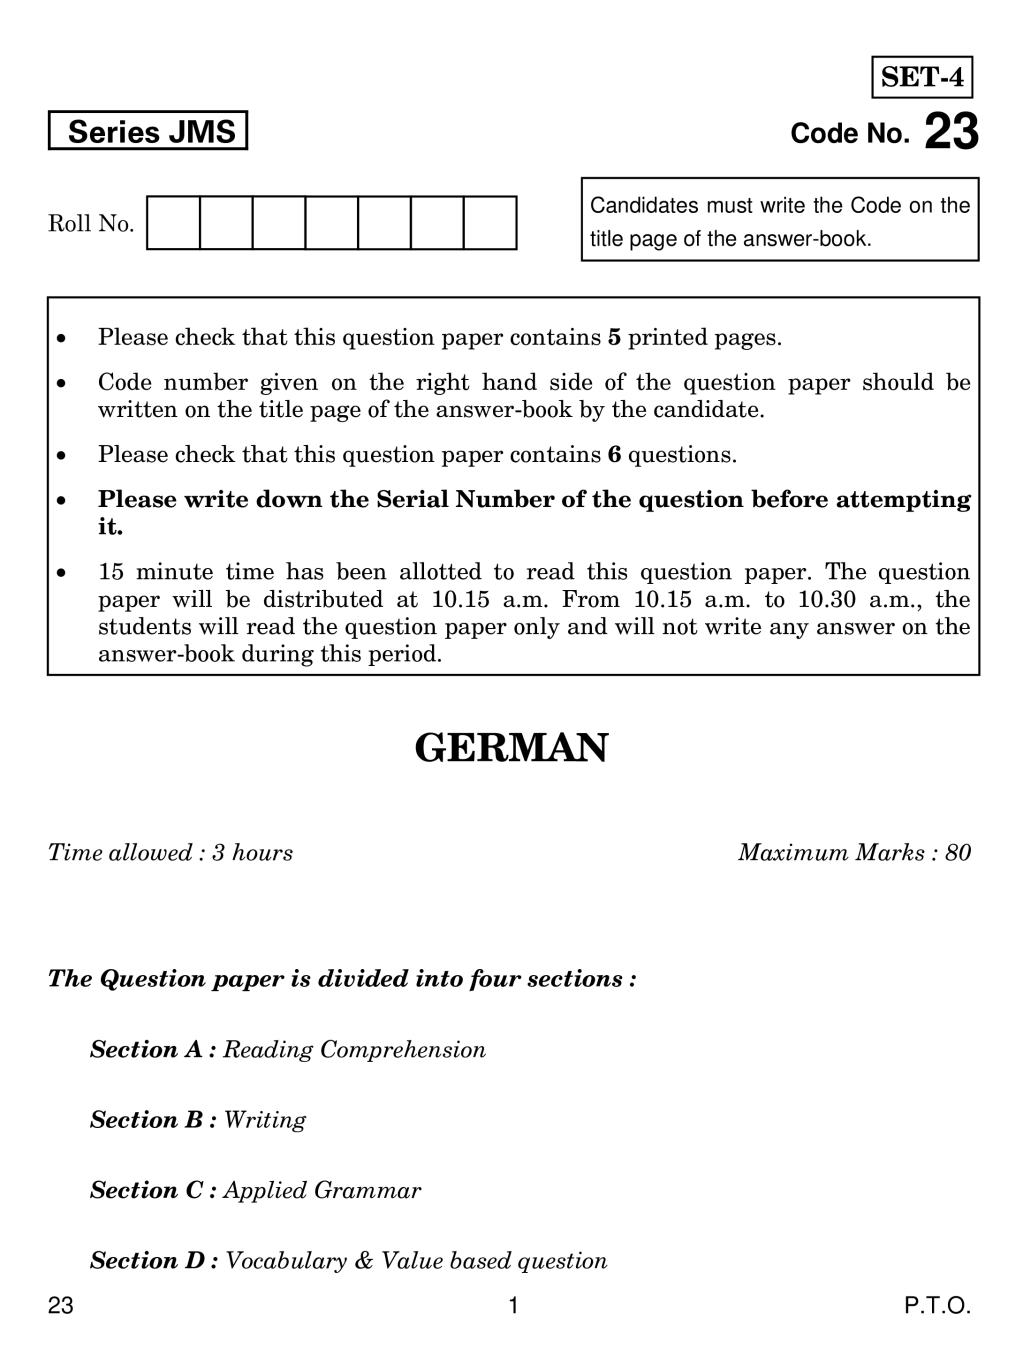 CBSE Class 10 German Question Paper 2019 - Page 1